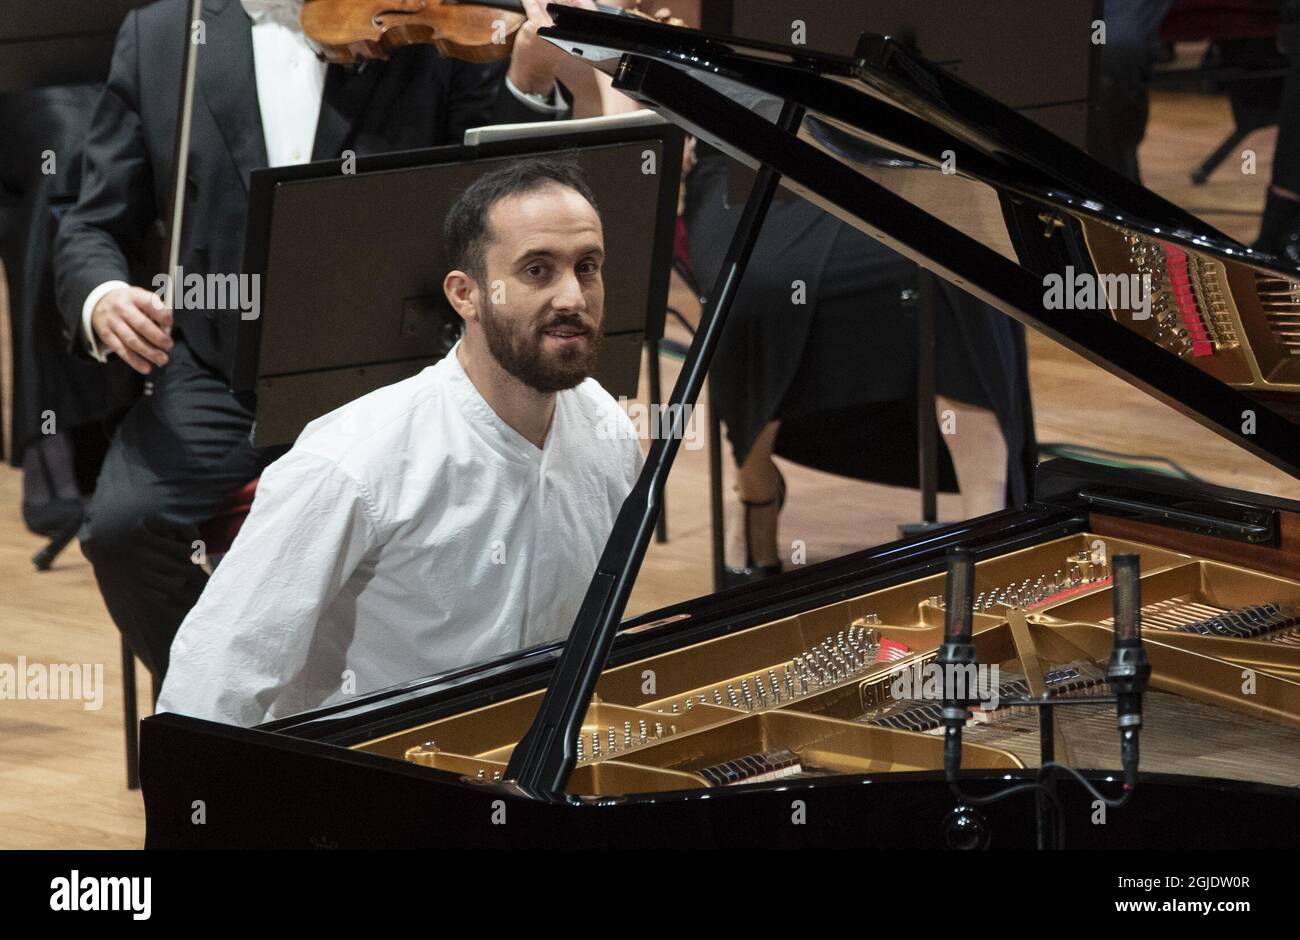 Russian-German pianist Igor Levit toghether with French conductor Stéphane Denève (not pictured) and the Royal Stockholm Philharmonic Orchestra perform Beethoven's Piano Concerto No. 5 (Emperor Concerto) during the Nobel Prize Concert 2020 at the Stockholm Concert Hall, in Stockholm, Sweden, on Dec. 08, 2020. Photo: Fredrik Sandberg / TT / code 10080 *** SWEDEN OUT ***  Stock Photo